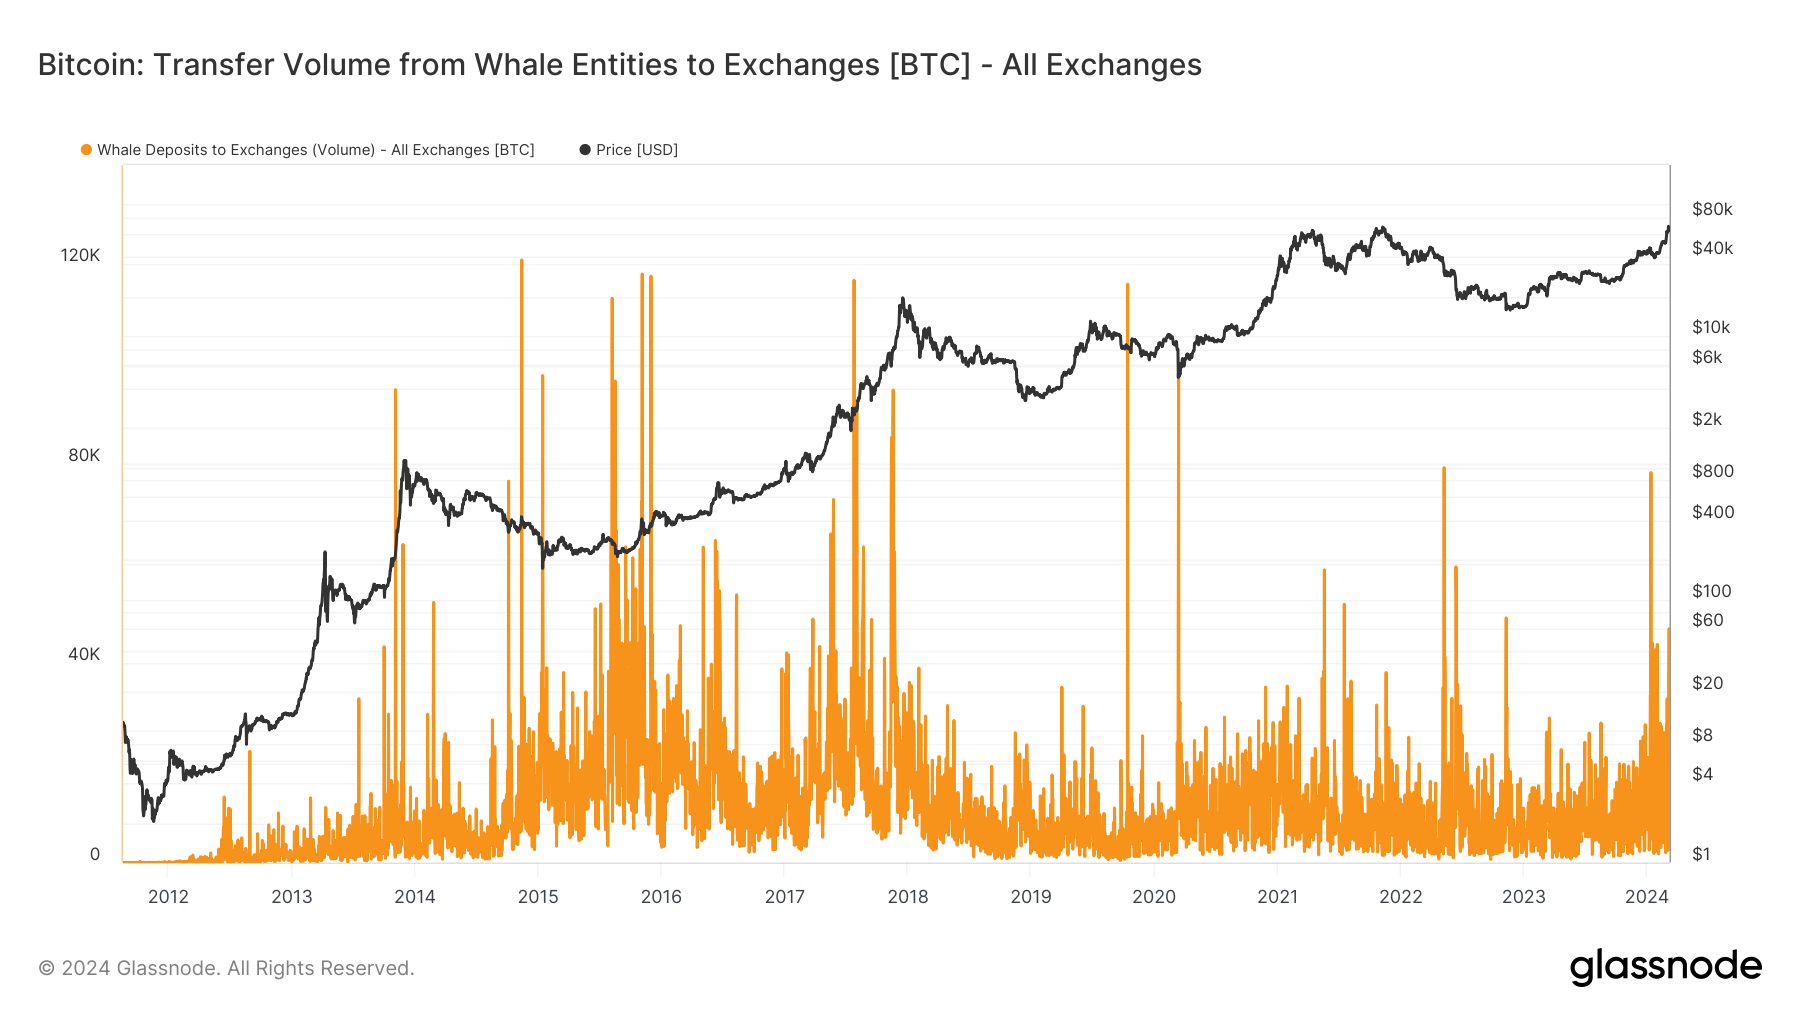 Transfer volume from whales to exchanges